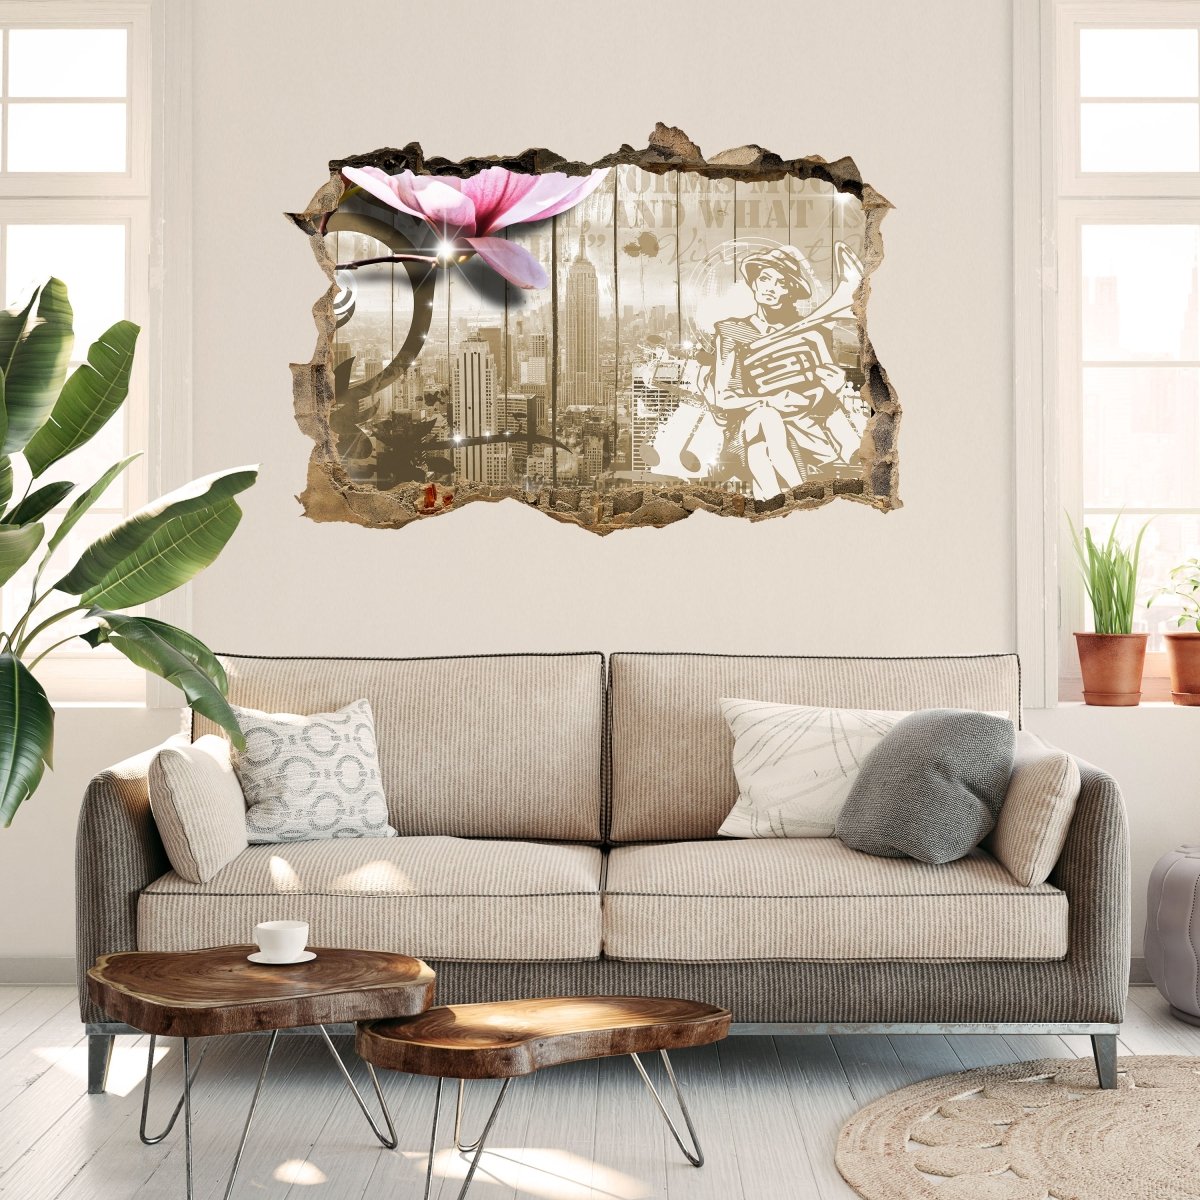 Music Vintage Blossoms New York 3D Wall Sticker - Wall Decal M0548